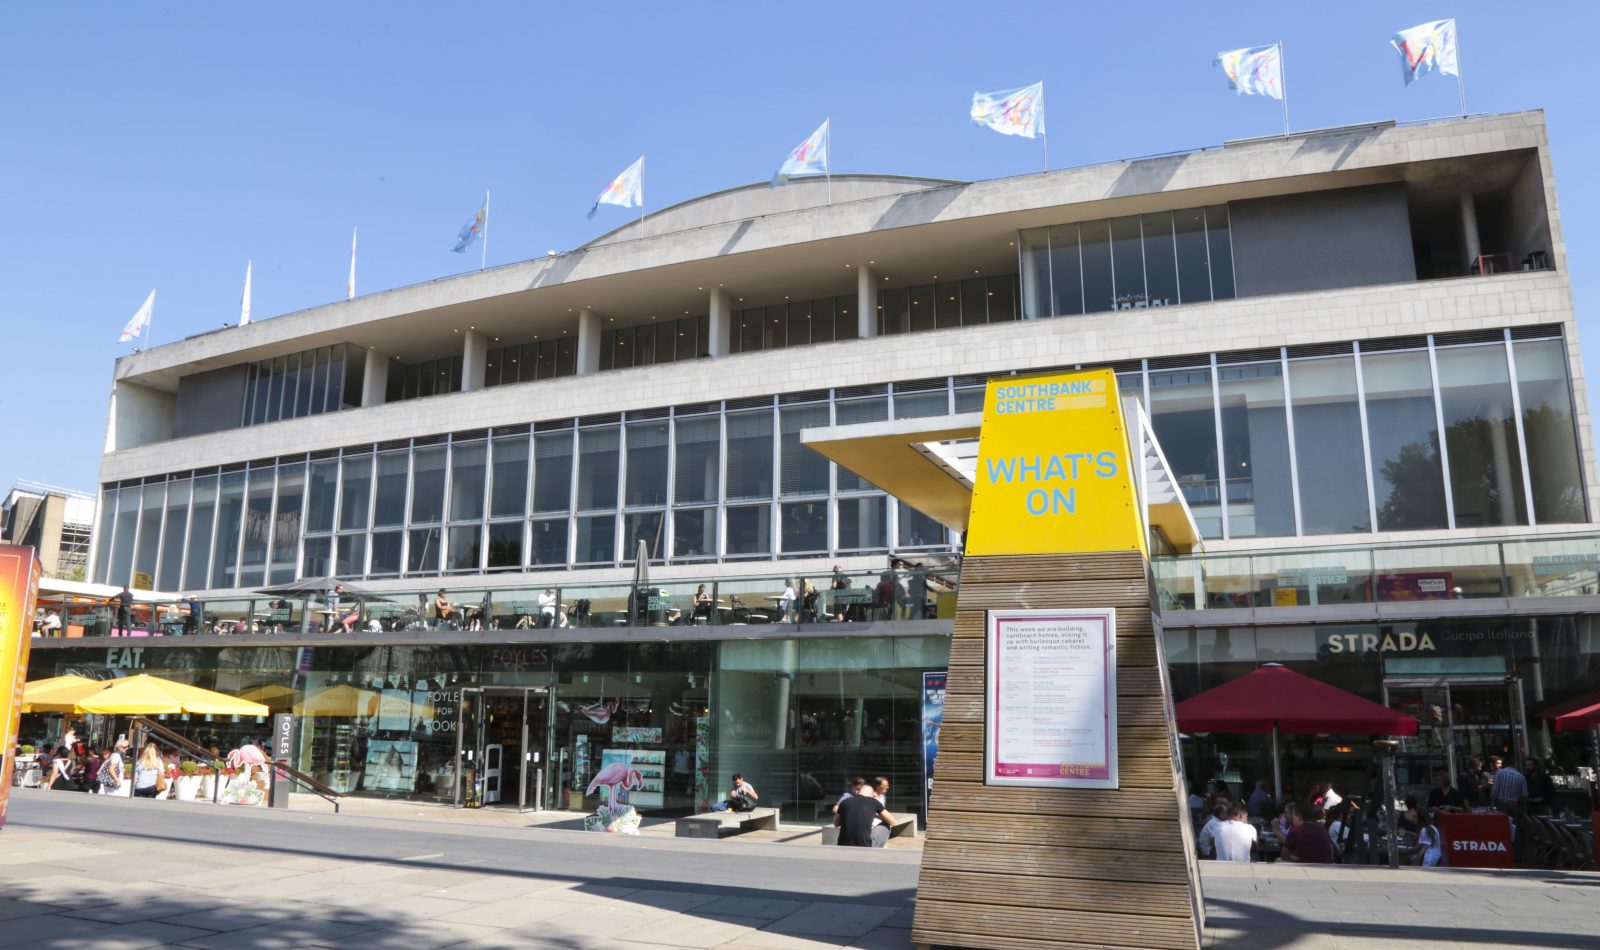 Photograph of Royal Festival Hall – a large concrete and glass building adorned with flags - beneath a cloudless blue sky